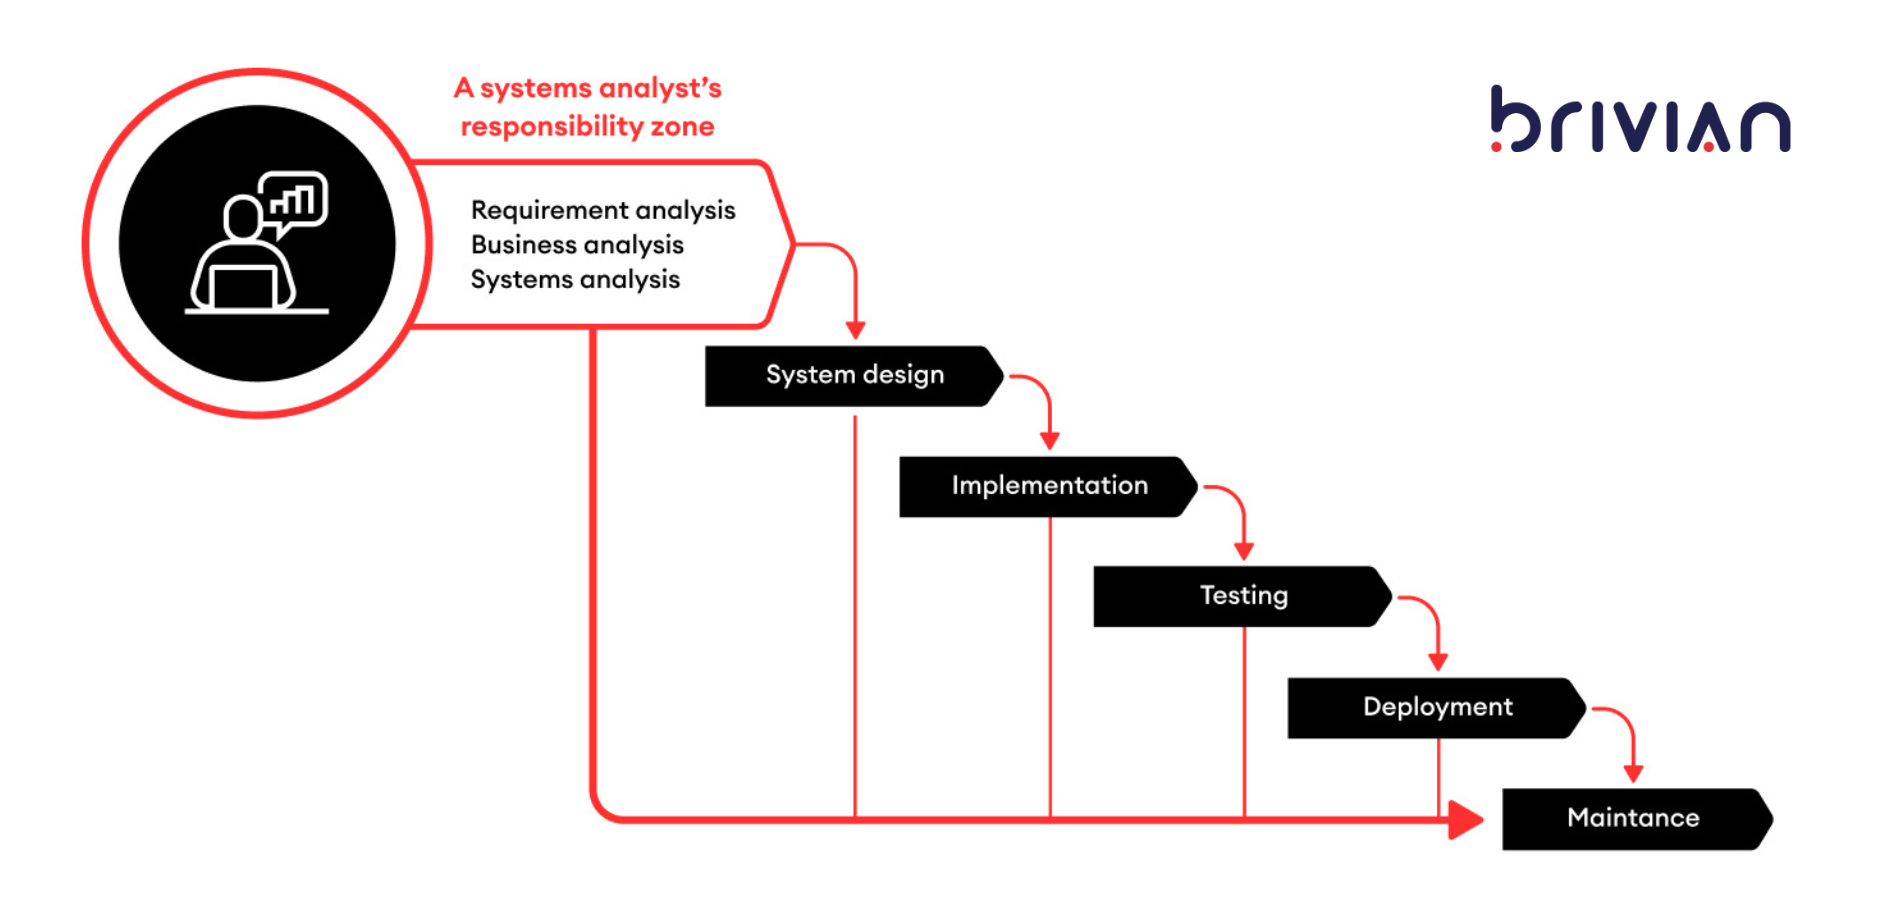 What is a systems analyst? The responsibility and influence zone of a systems analyst in the software development cycle.